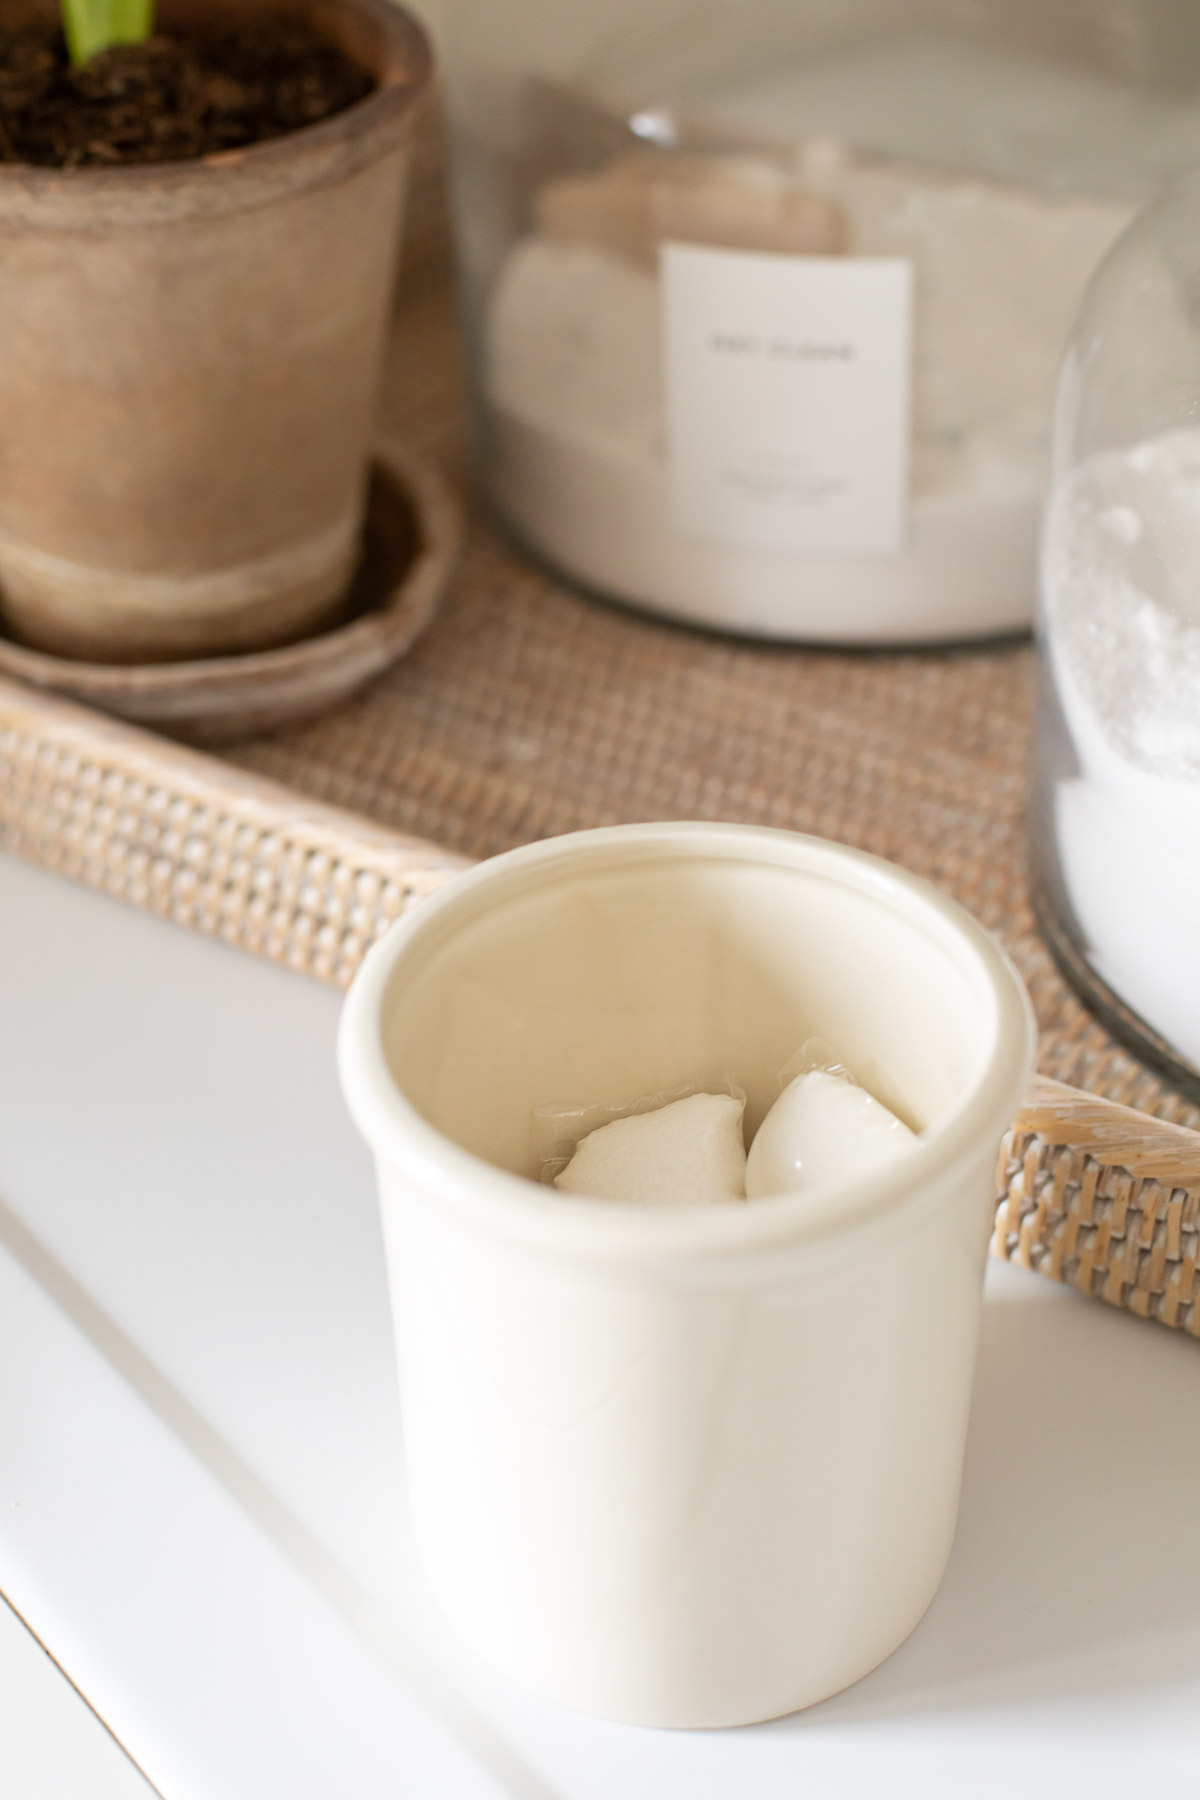 A white bowl of sugar next to a potted plant in a laundry room organized space.